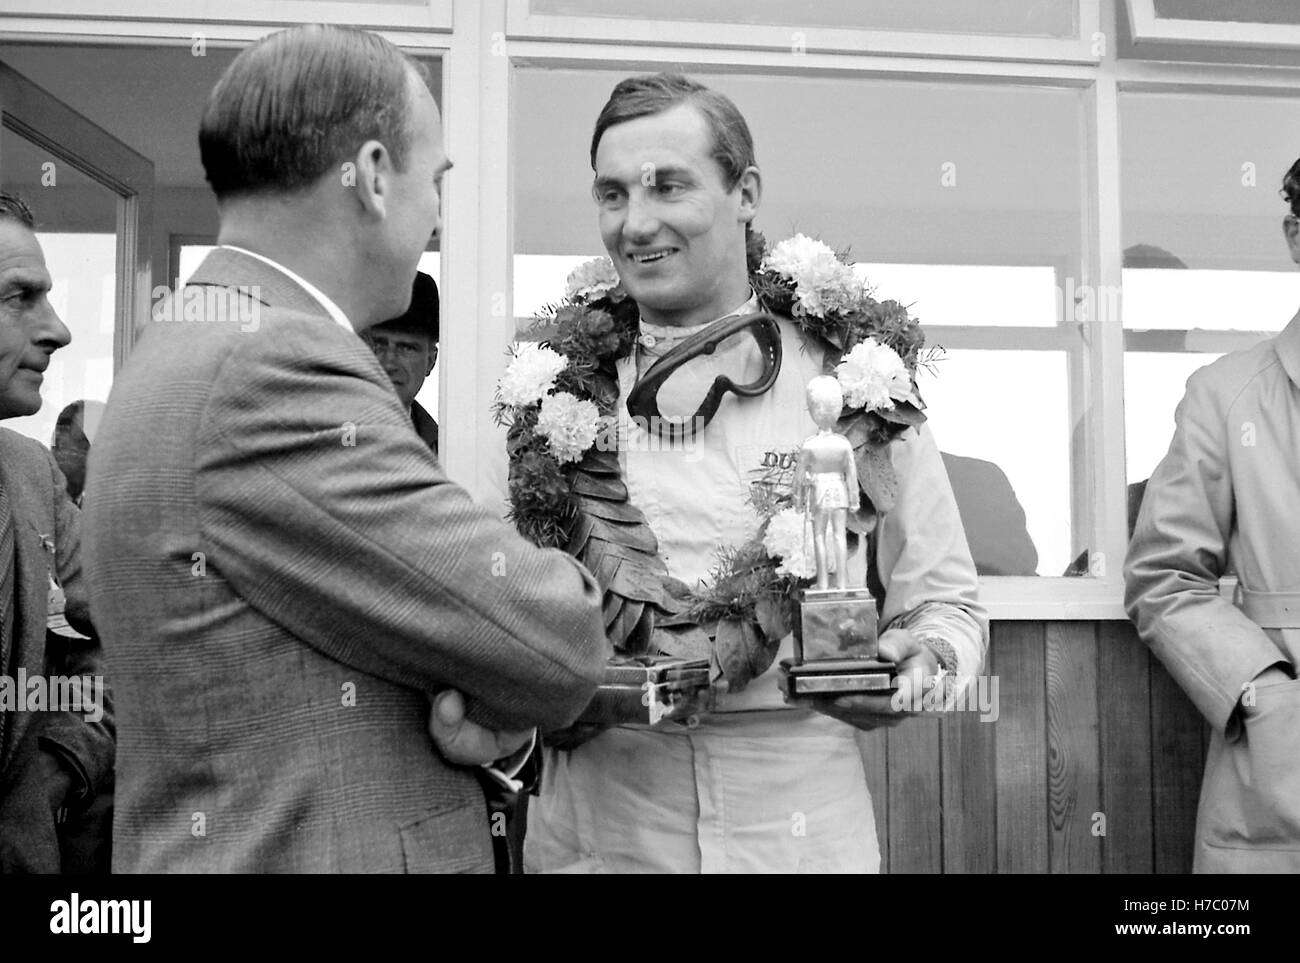 FRED TAYLOR 1962 GUARDS TROPHY Mike PARKES WITH GUARDS TROPHY LAURELS PODIUM Stock Photo